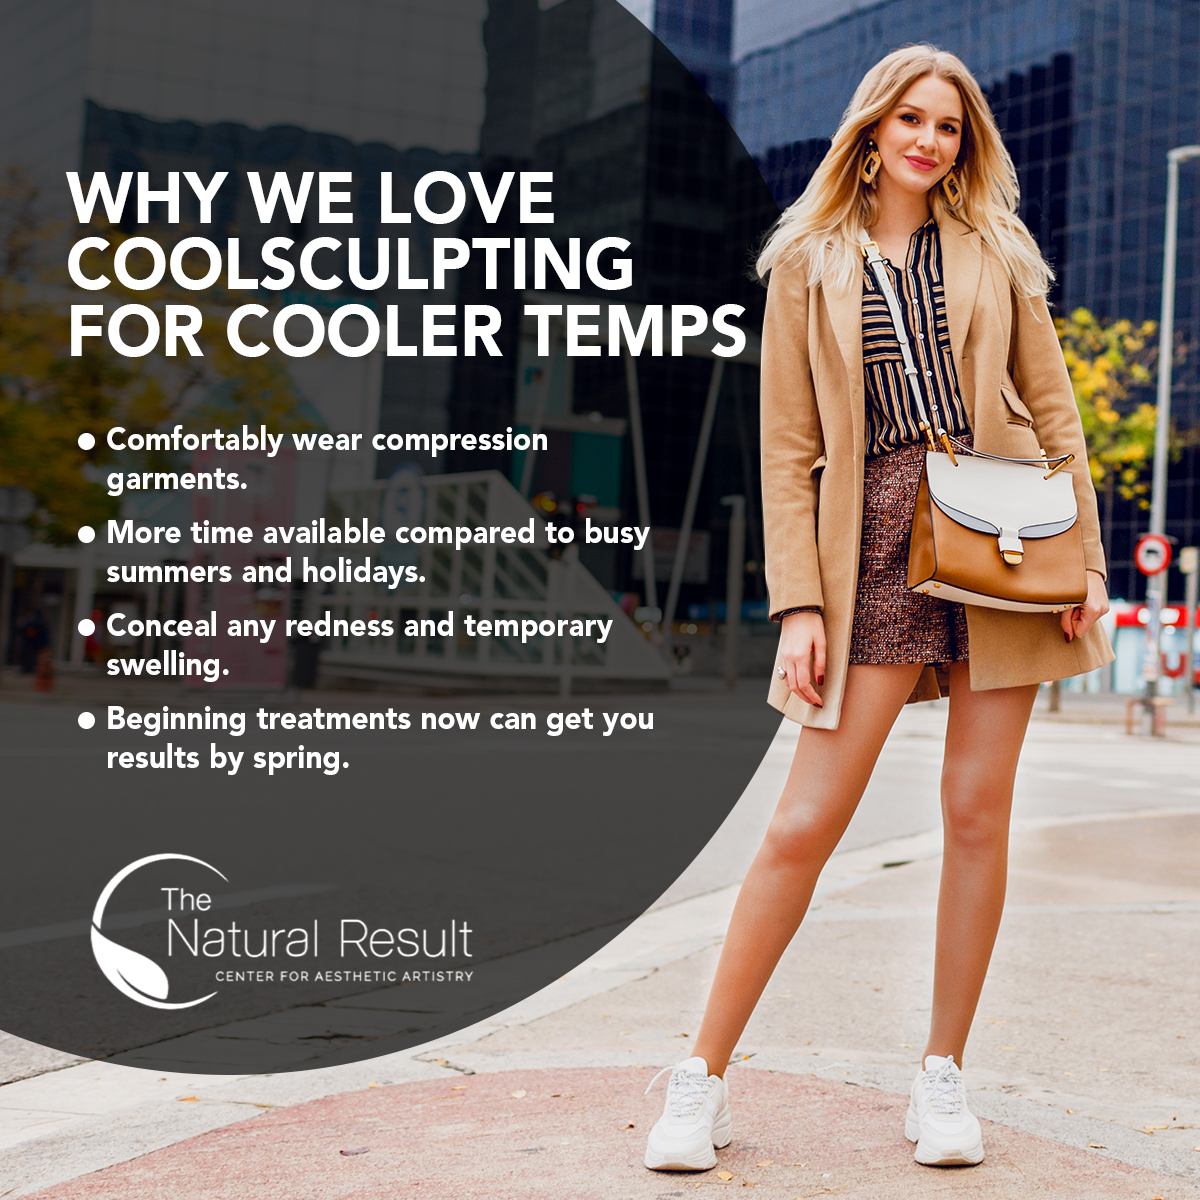 Why We Love CoolSculpting for Cooler Temps